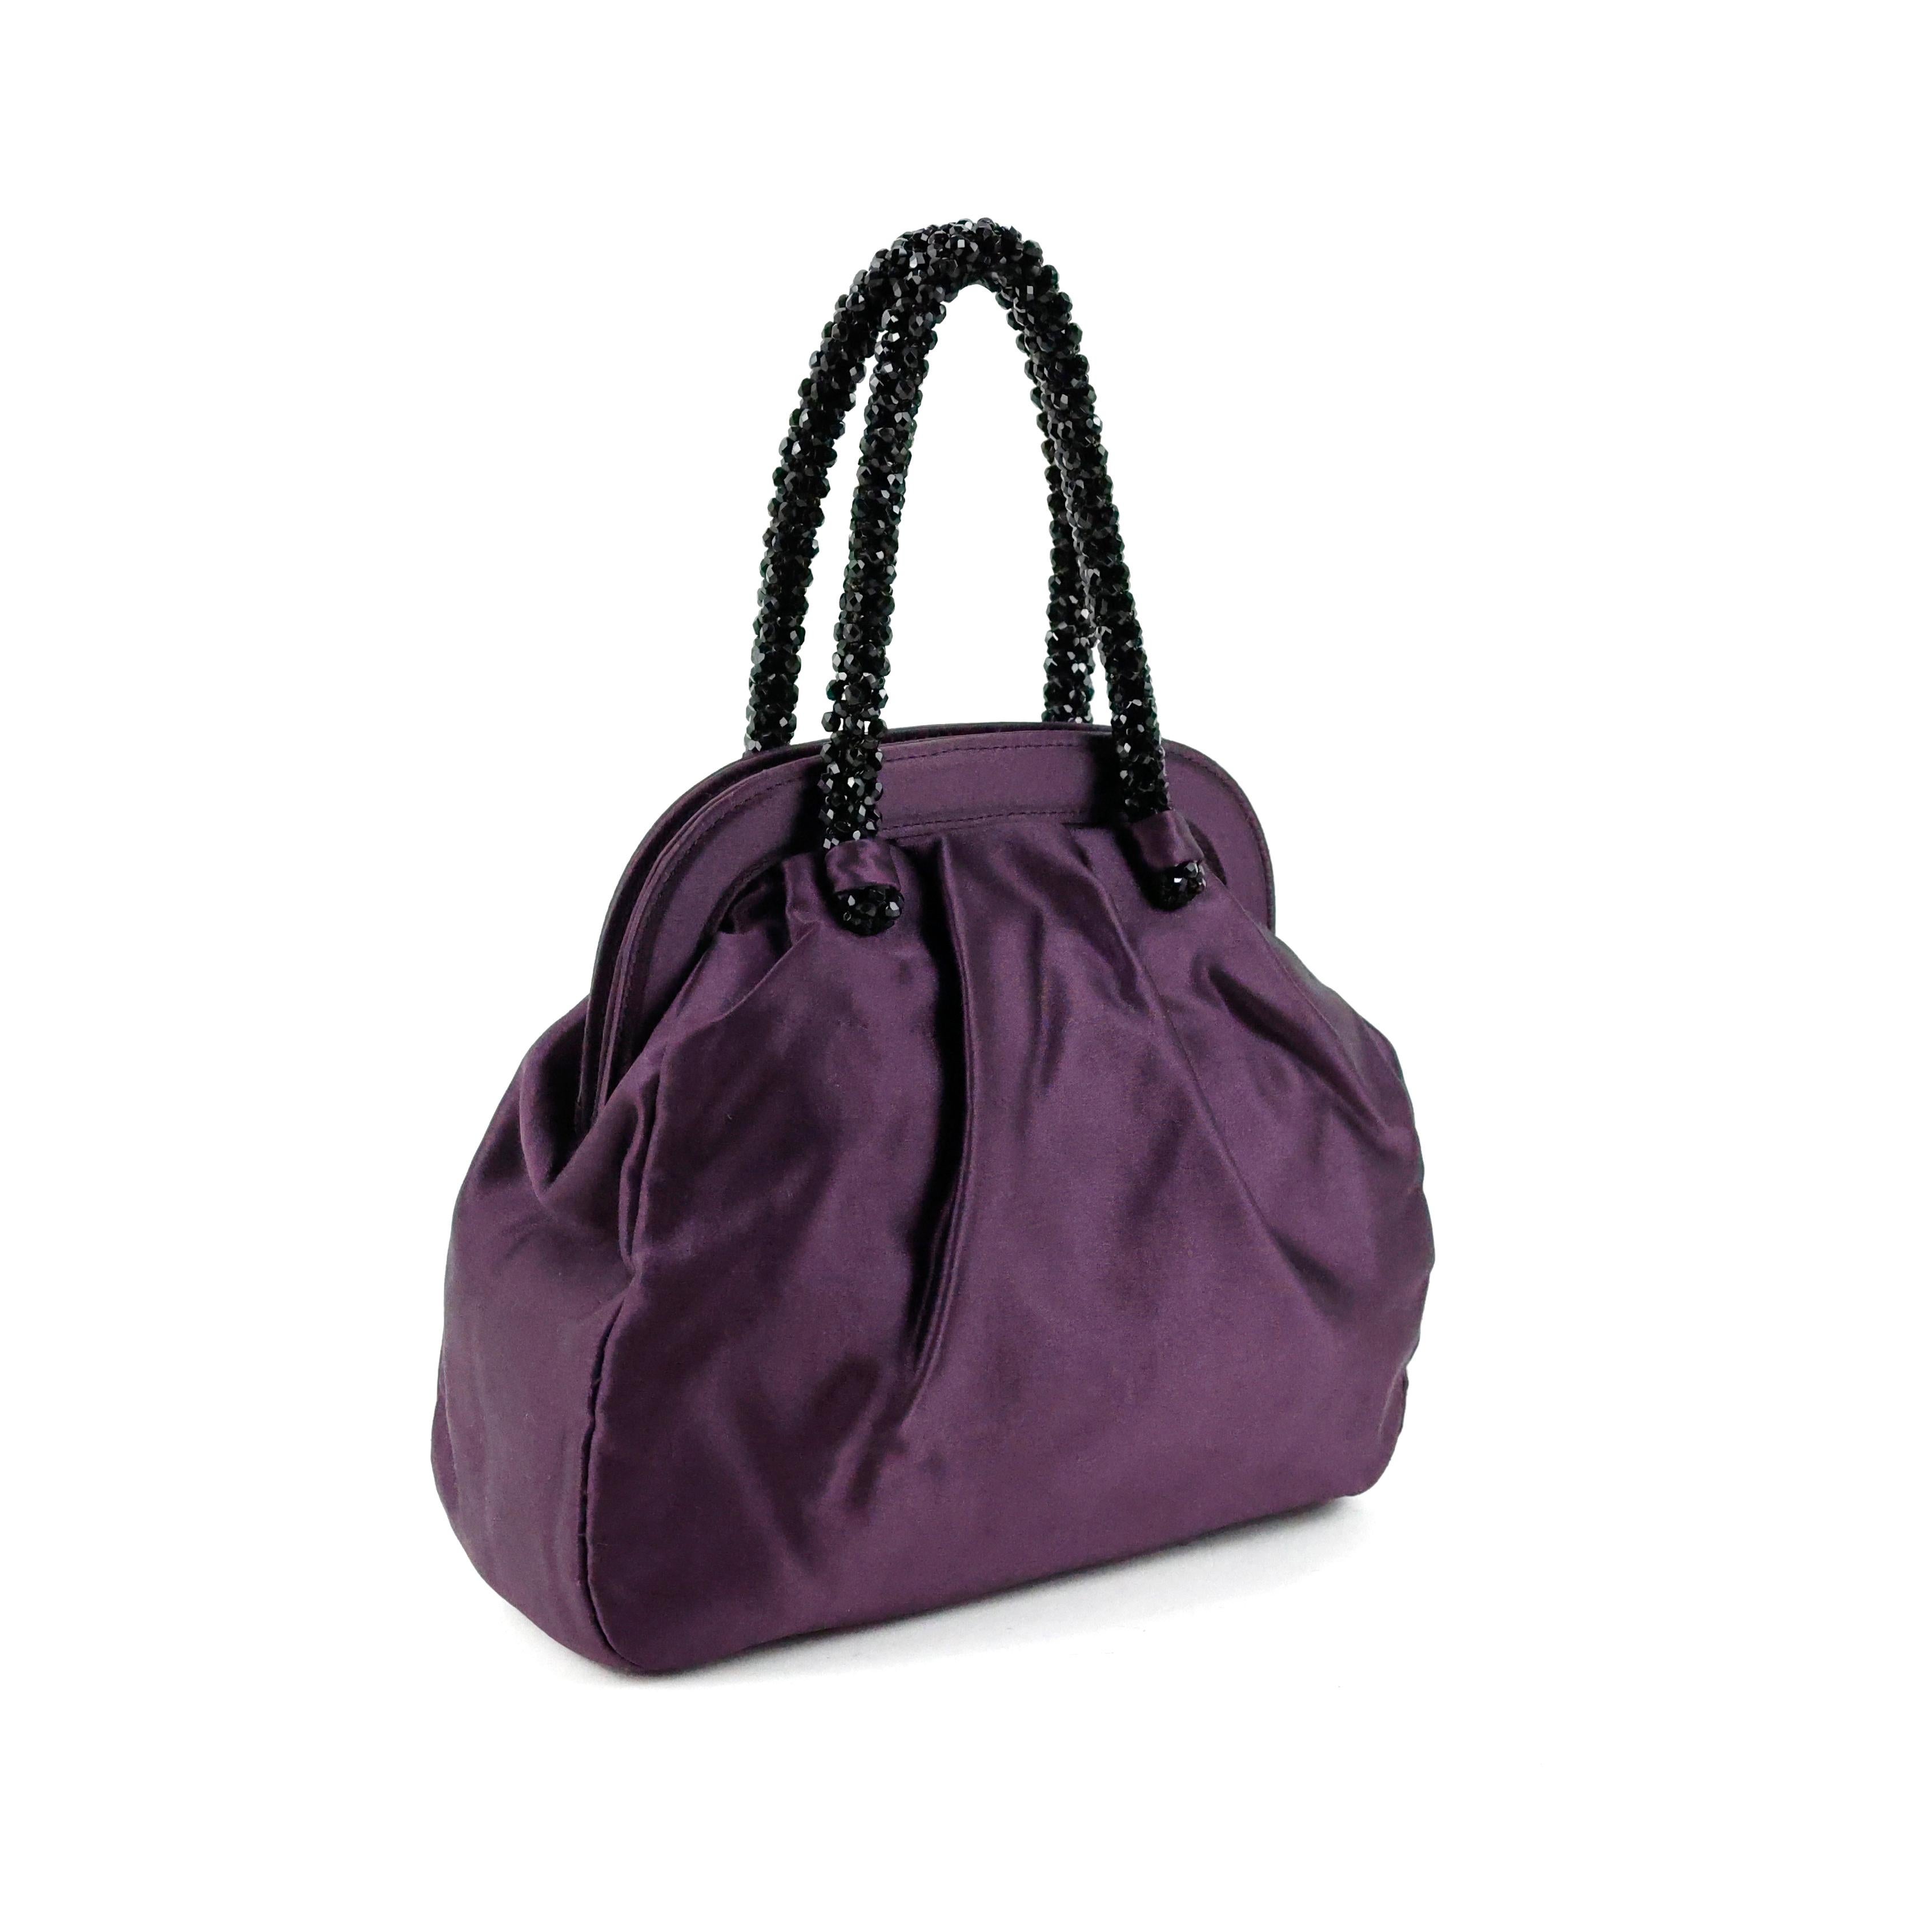 Prada purse in silk color purple, dark stones handle, gold hardware. 

Condition:
Really good.

Packing/accessories:
Dustbag.

Measurements:
Width: 20 cm
Height: 21 cm
Depth: 8 cm